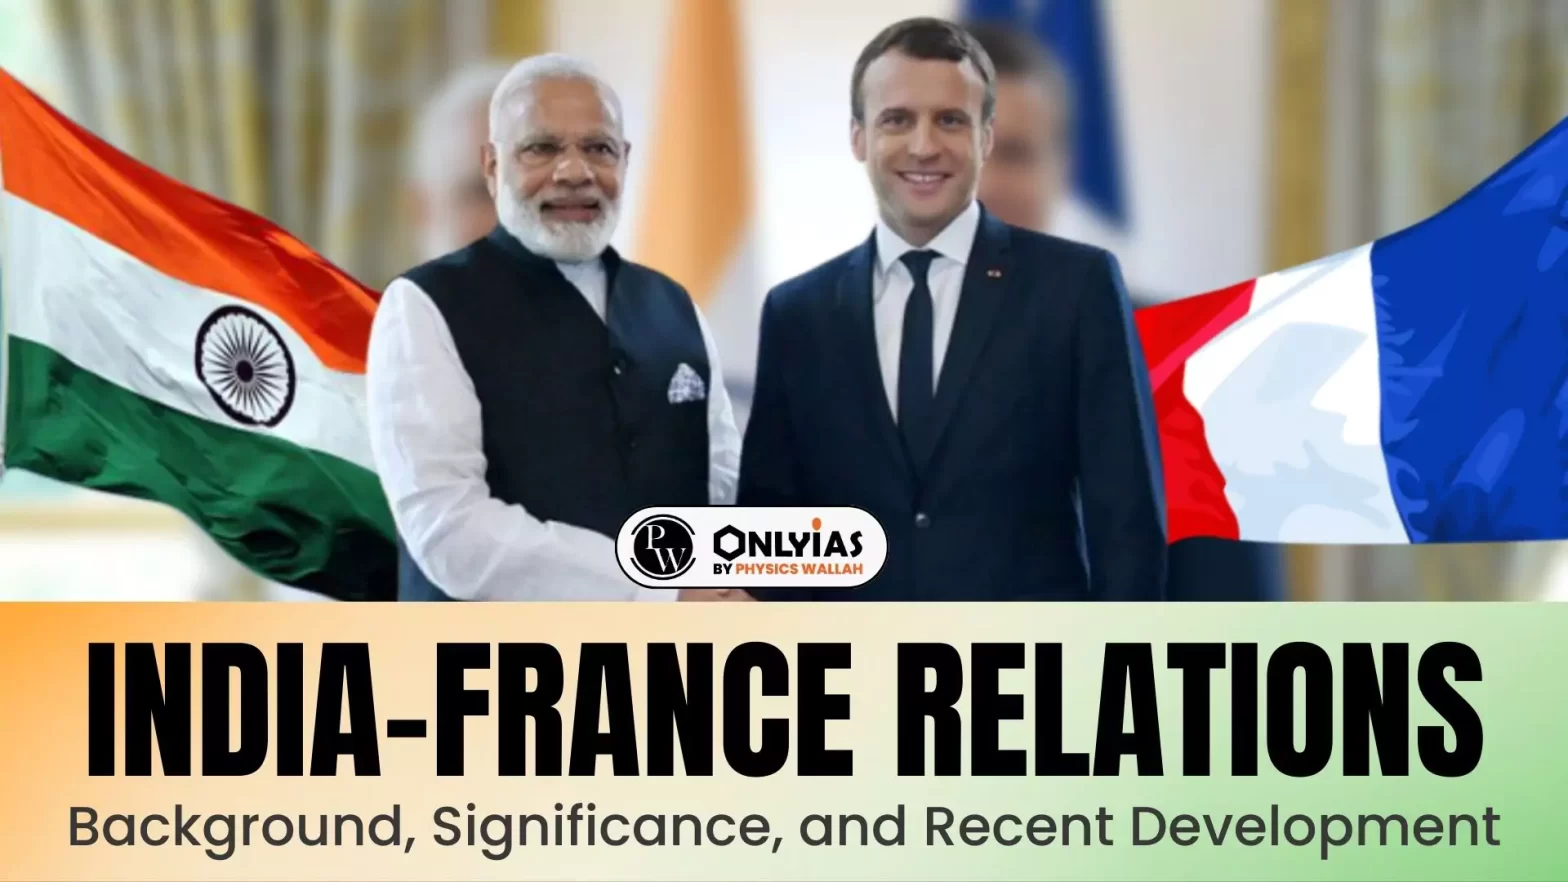 India France Relations: Background, Significance, and Recent Development